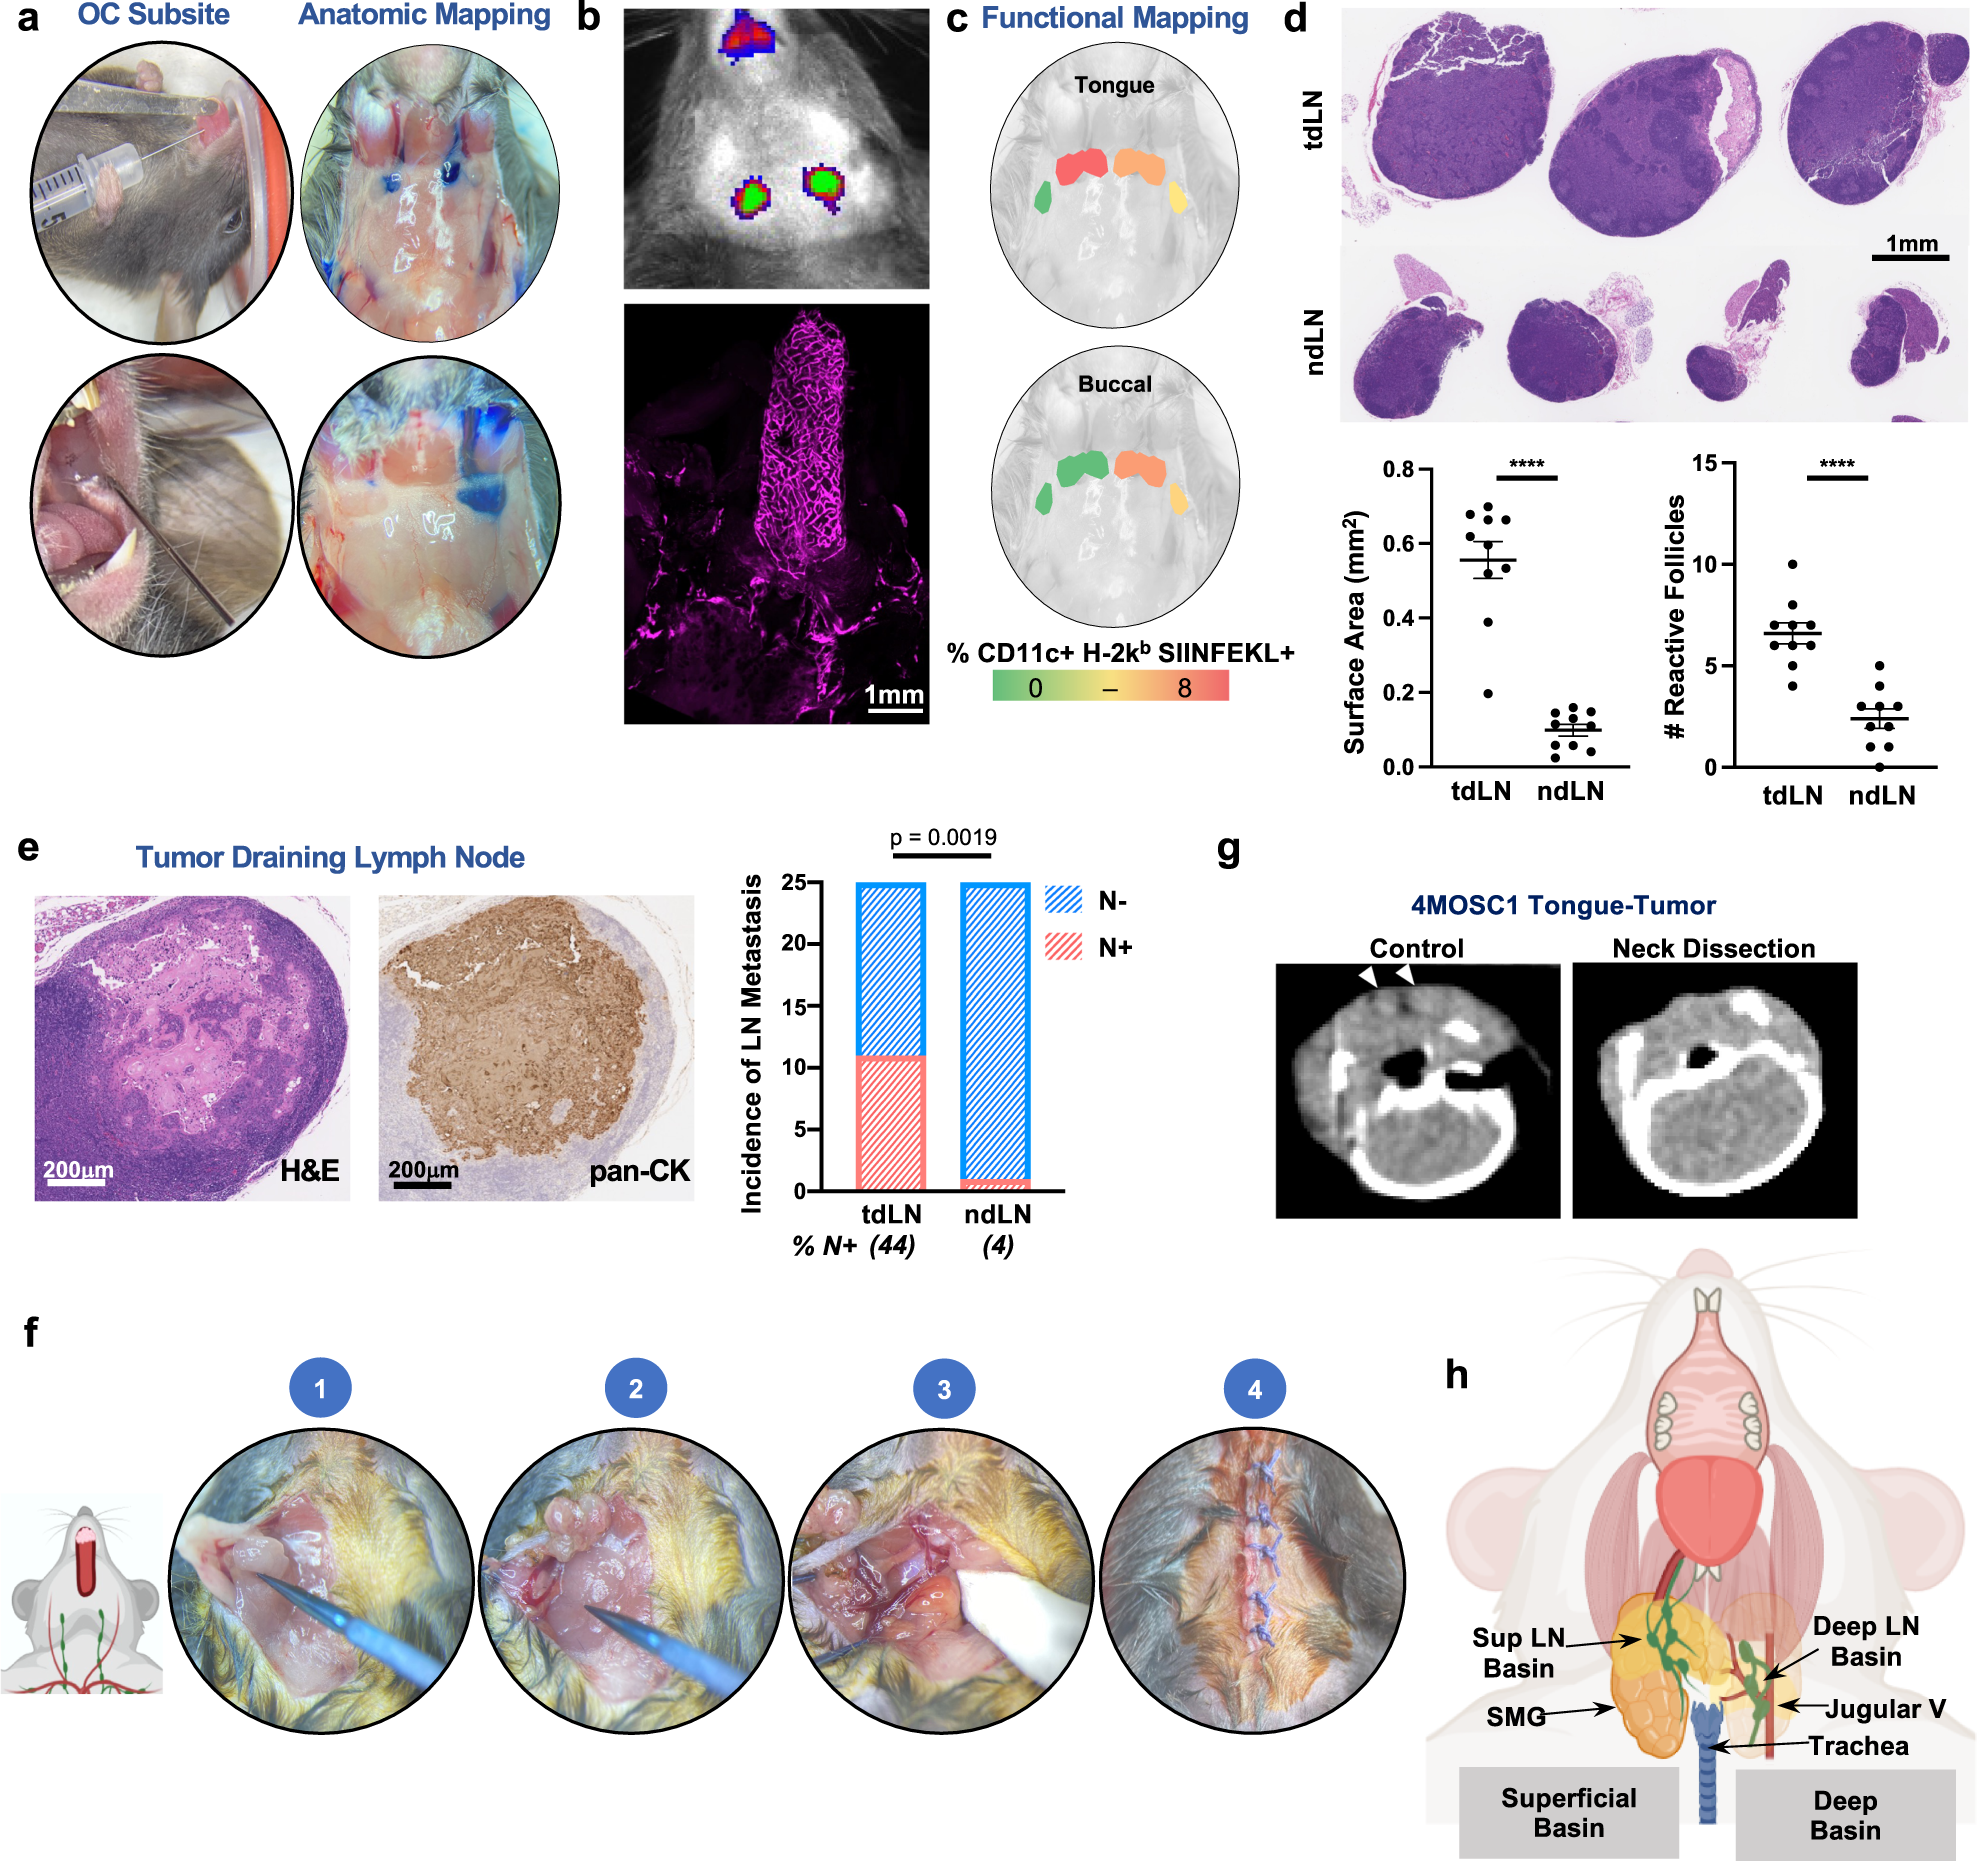 Lymphatic-preserving treatment sequencing with immune checkpoint inhibition  unleashes cDC1-dependent antitumor immunity in HNSCC | Nature Communications